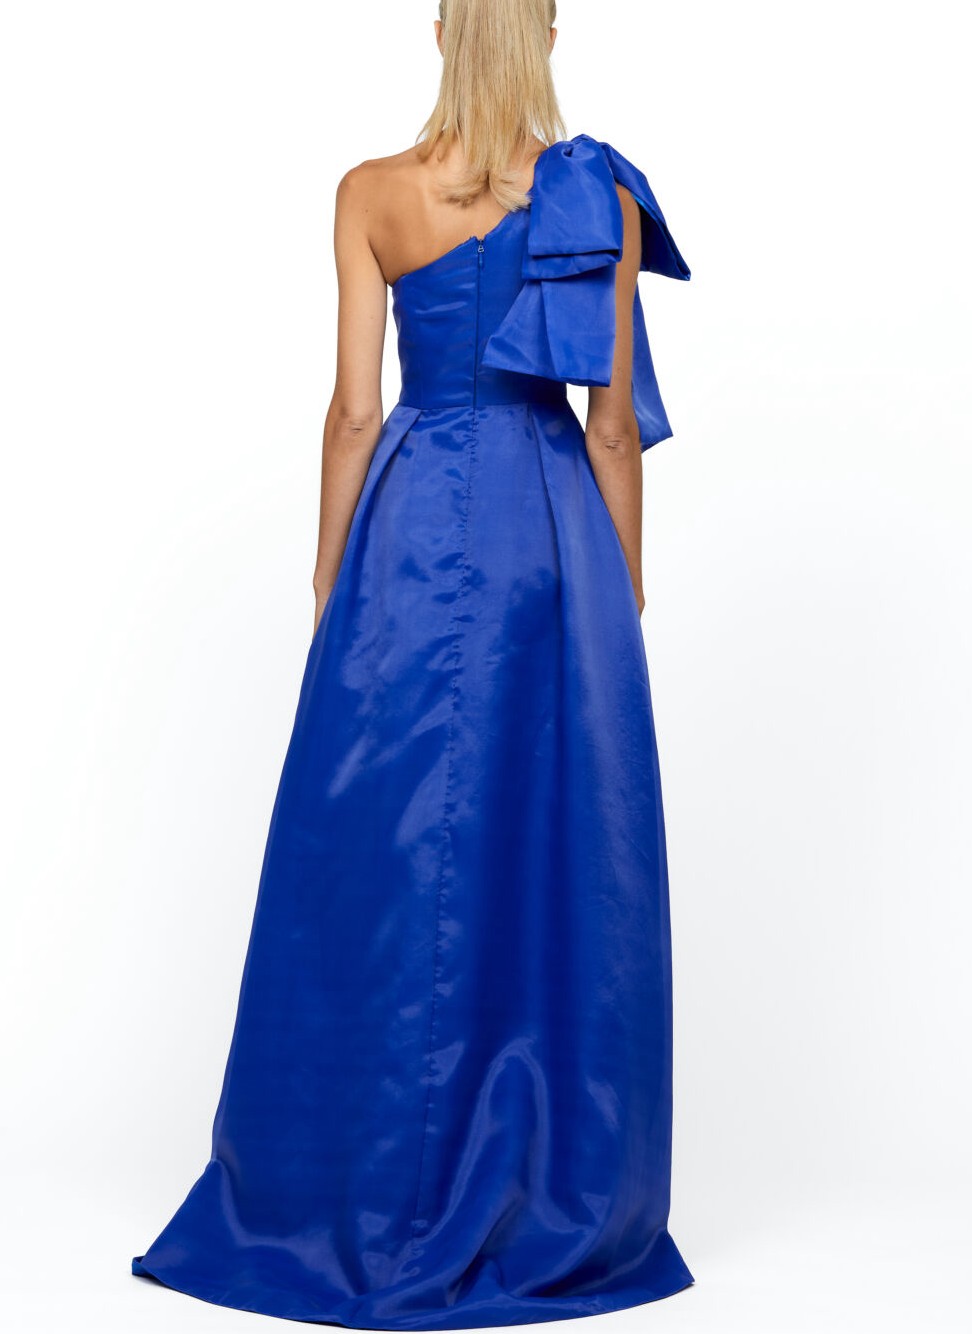 One-Shoulder Asymmetrical Satin Pockets Evening Dresses With Bow